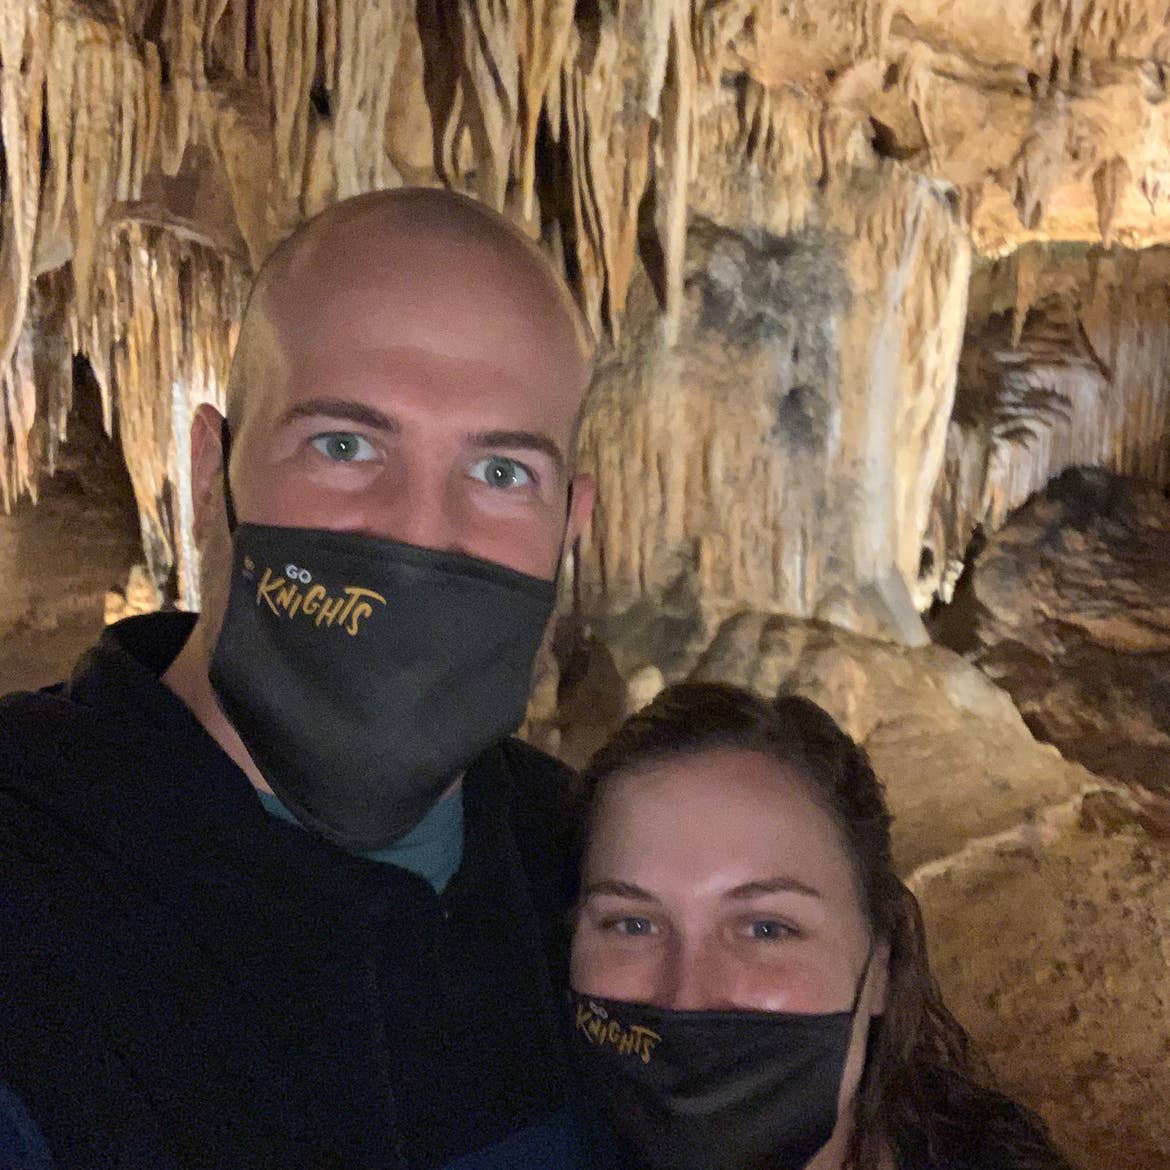 Featured Contributor, Ashley Fraboni (right) and her fiancé, Nicholas, at Luray Caverns in Harrisonburg, VA.